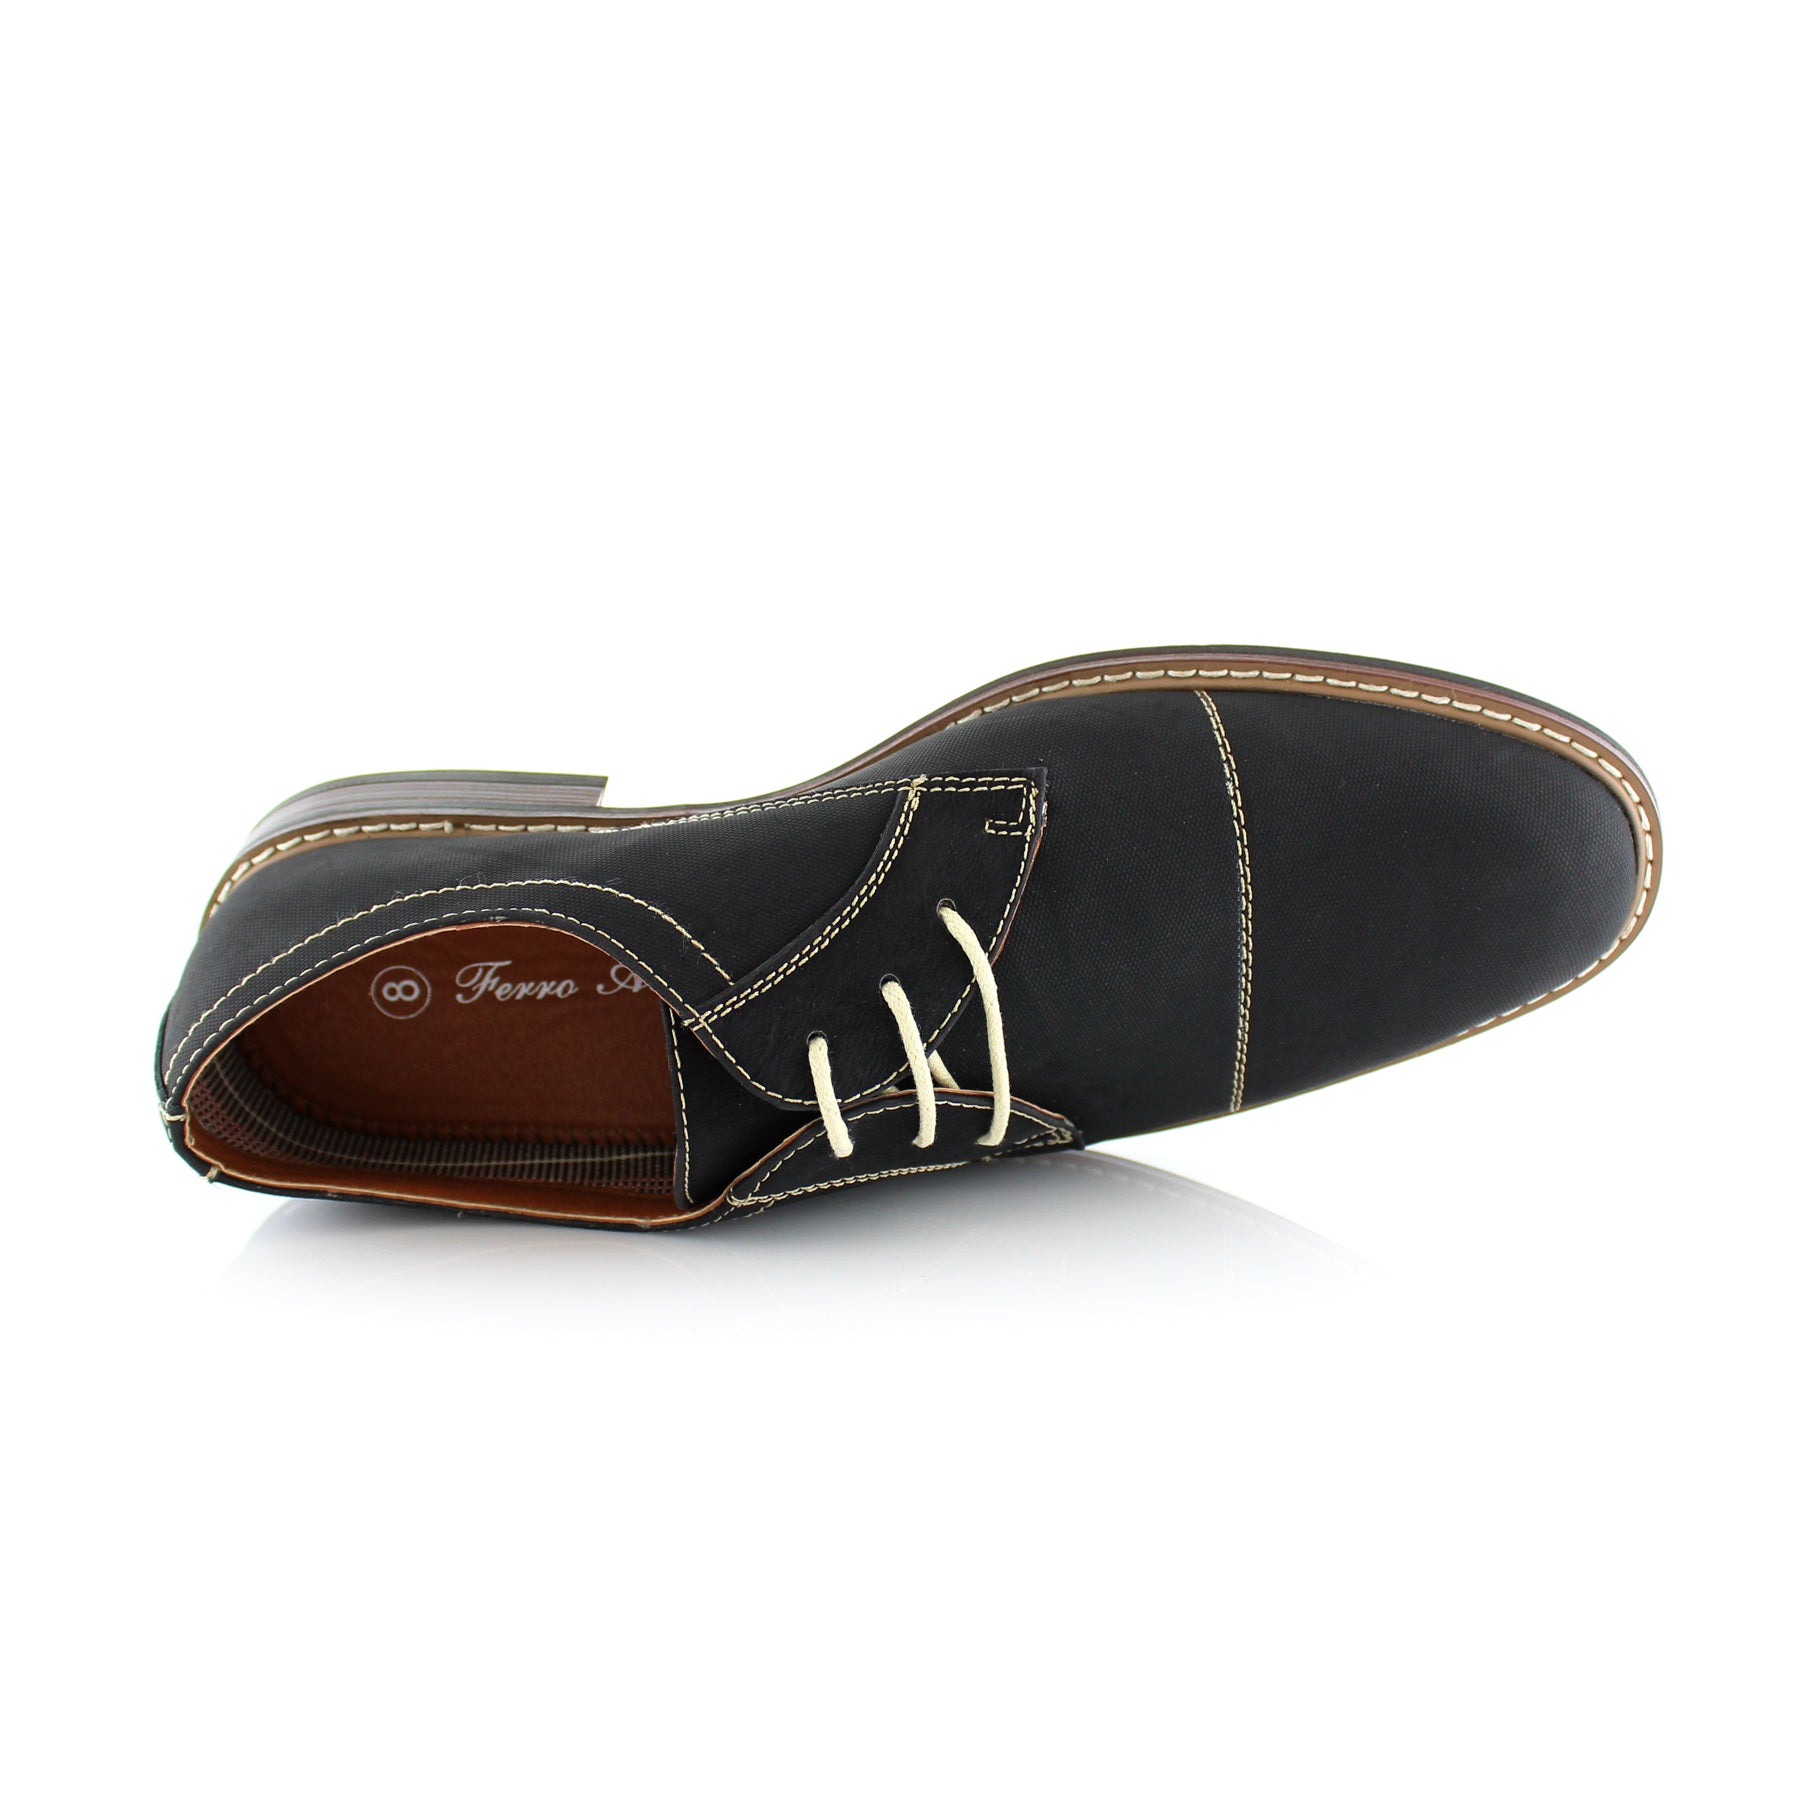 Embossed Derby Shoes | Jason by Ferro Aldo | Conal Footwear | Top-Down Angle View